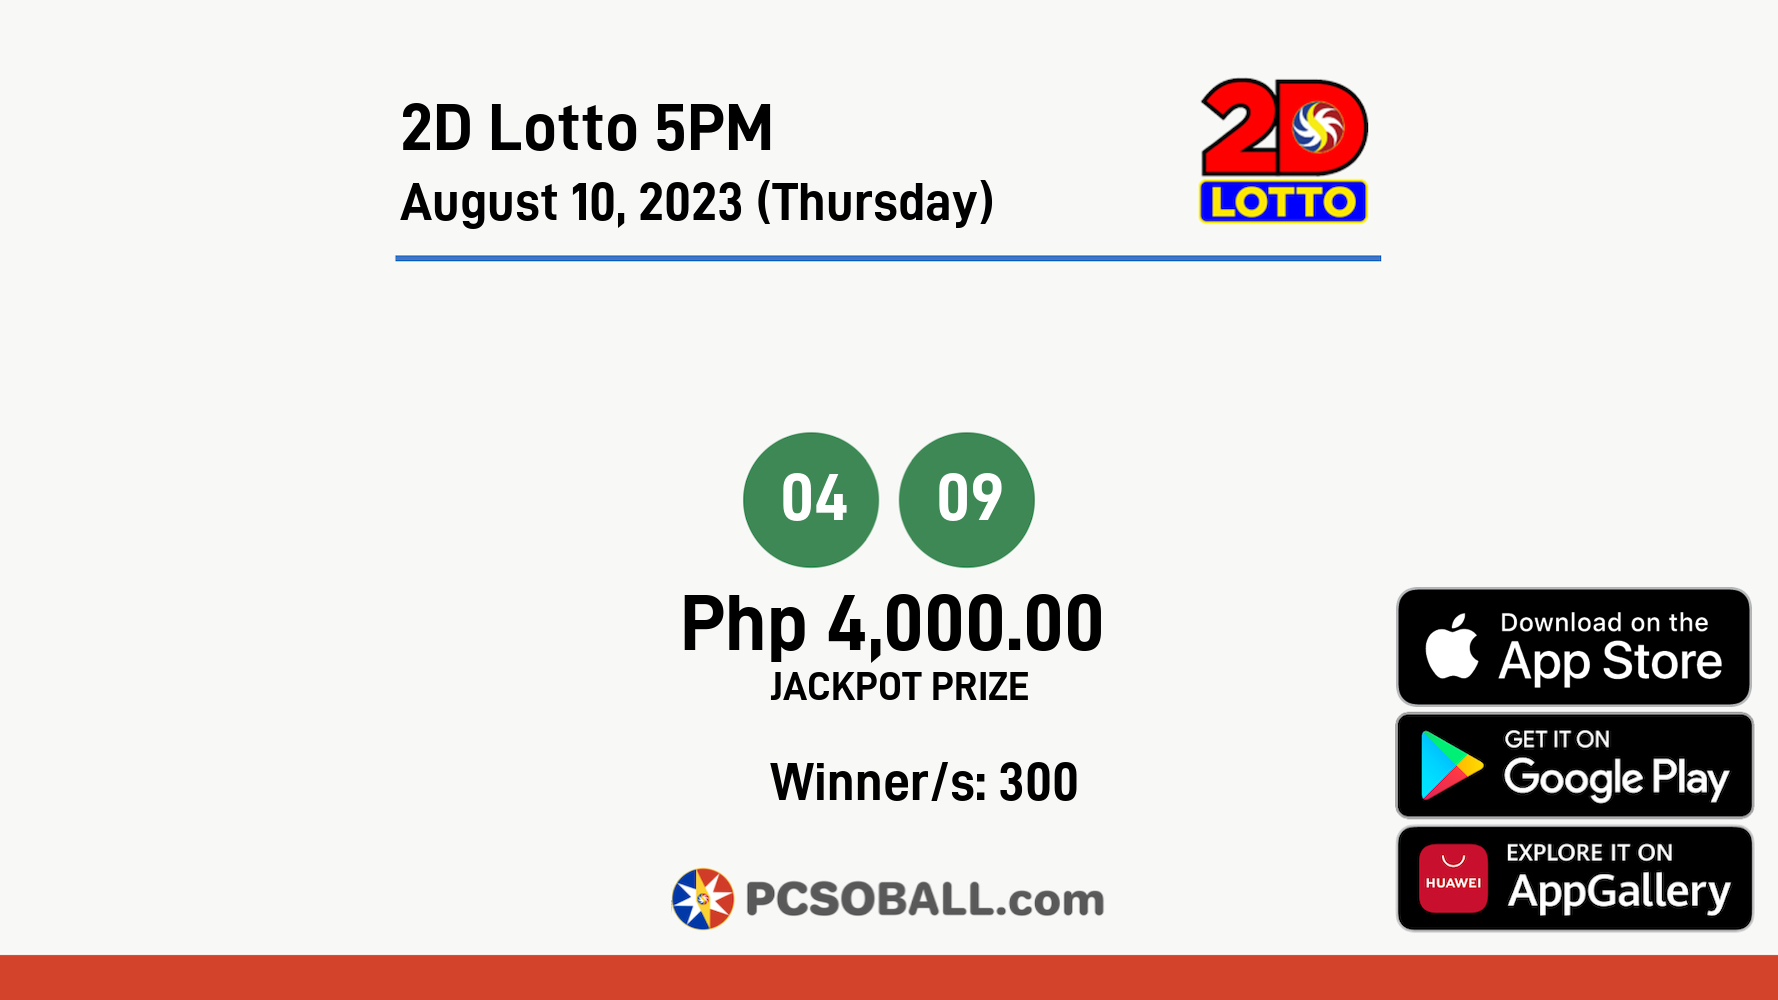 2D Lotto 5PM August 10, 2023 (Thursday) Result